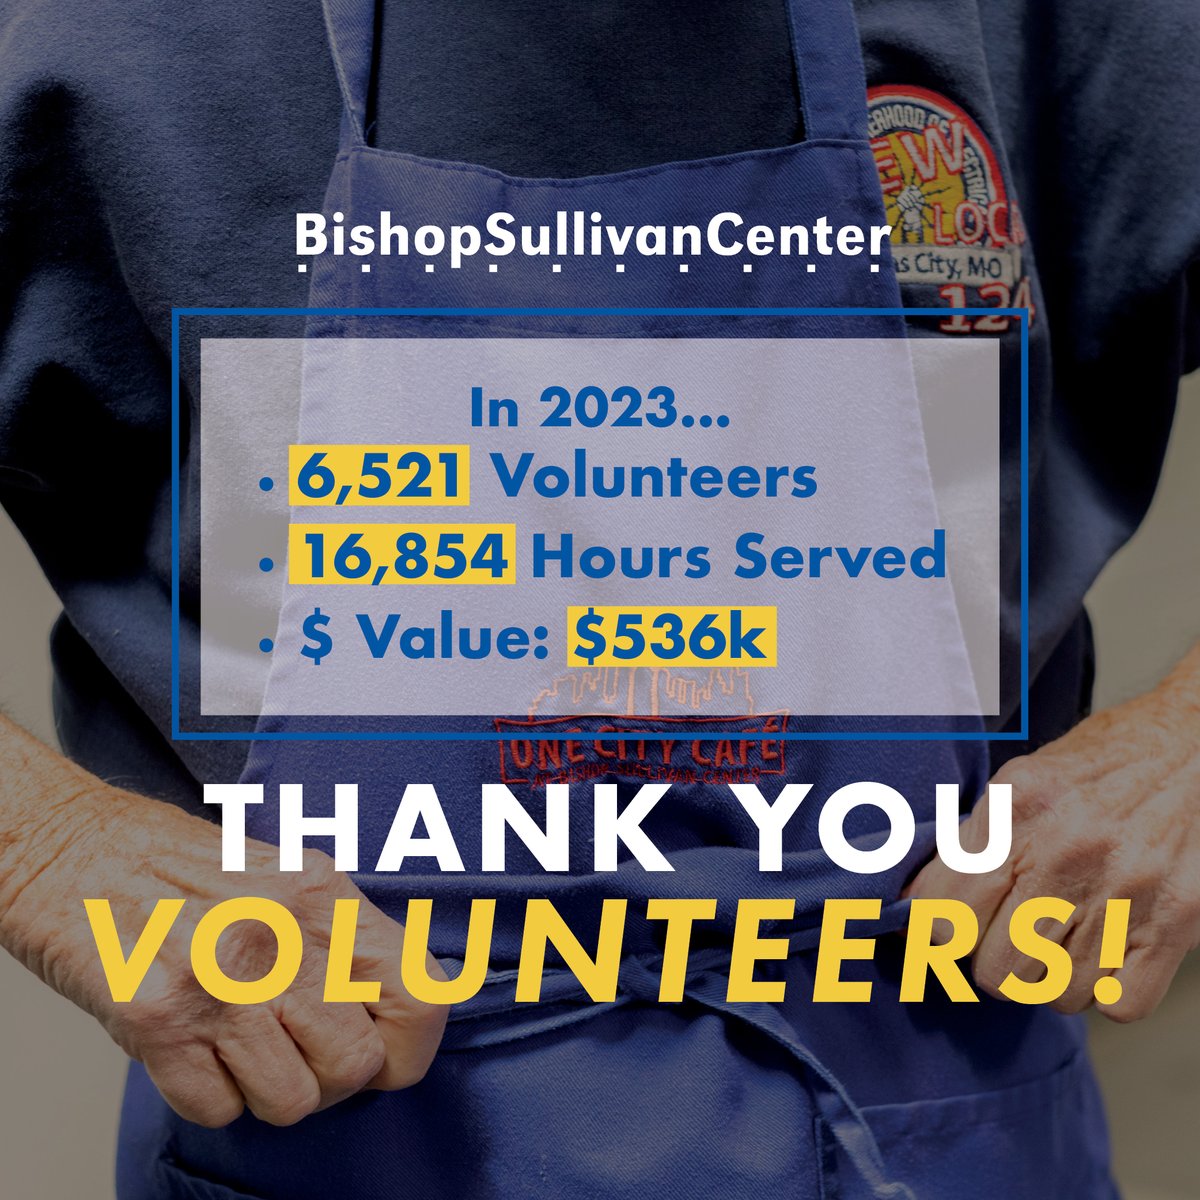 In 2023, 6,521 volunteers contributed 16,854 hours of service in support of our mission. Their monetary impact? An incredible $536k! We are so grateful for the incredible individuals & organizations who make our programs possible. Thank you, volunteers! #VolunteerRecognitionDay